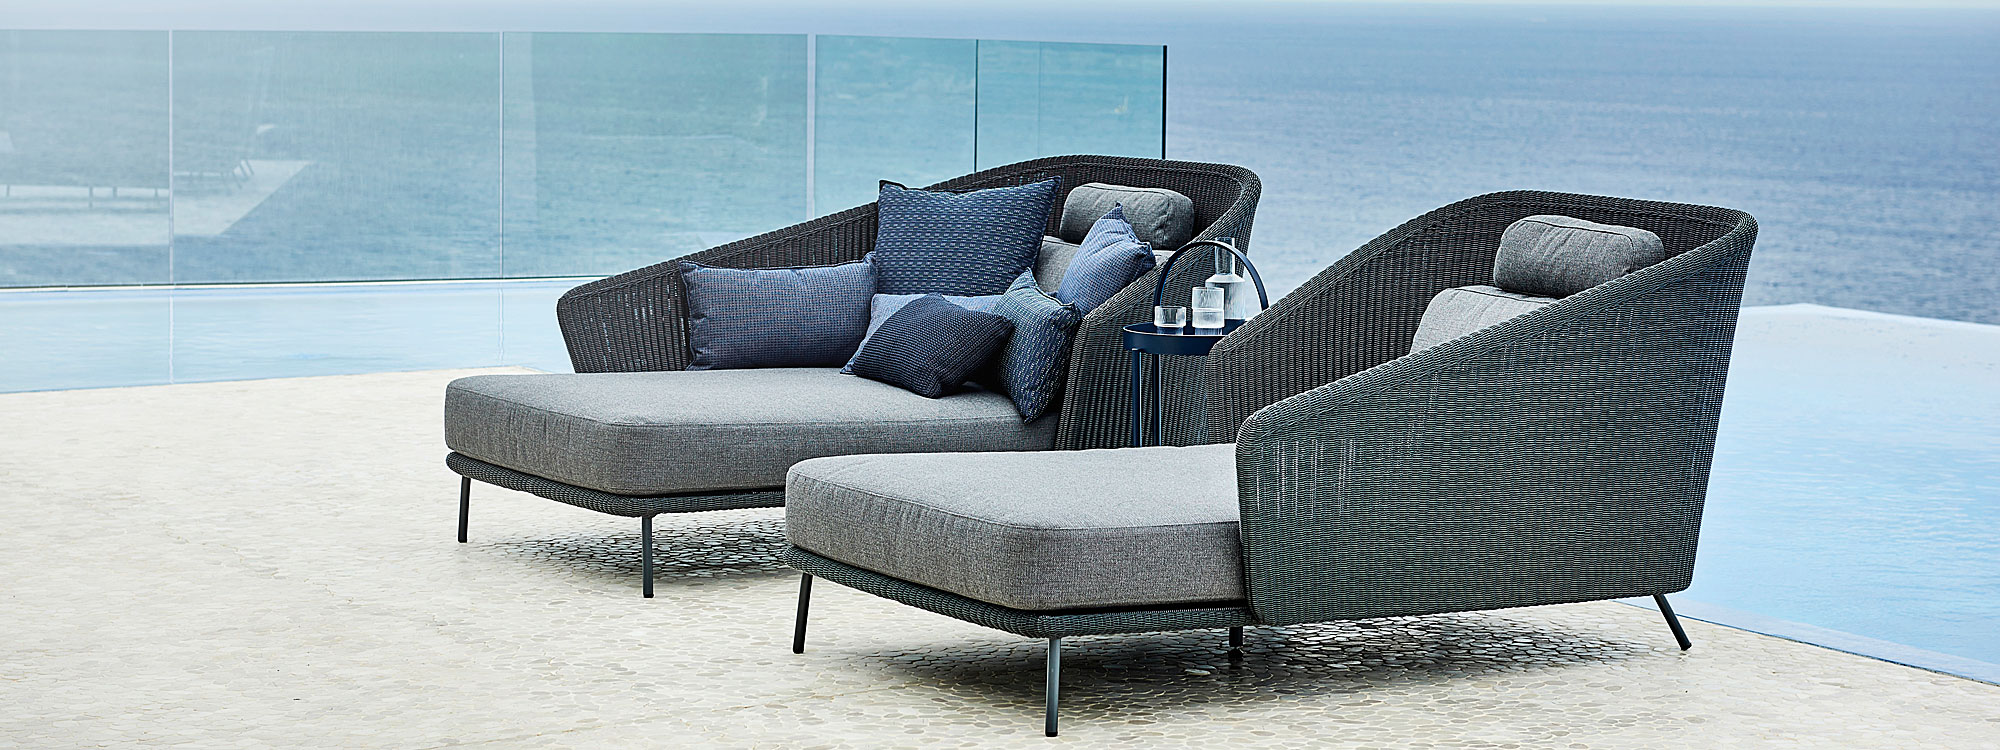 Image of pair of dark grey garden daybeds with grey cushions by Cane-line